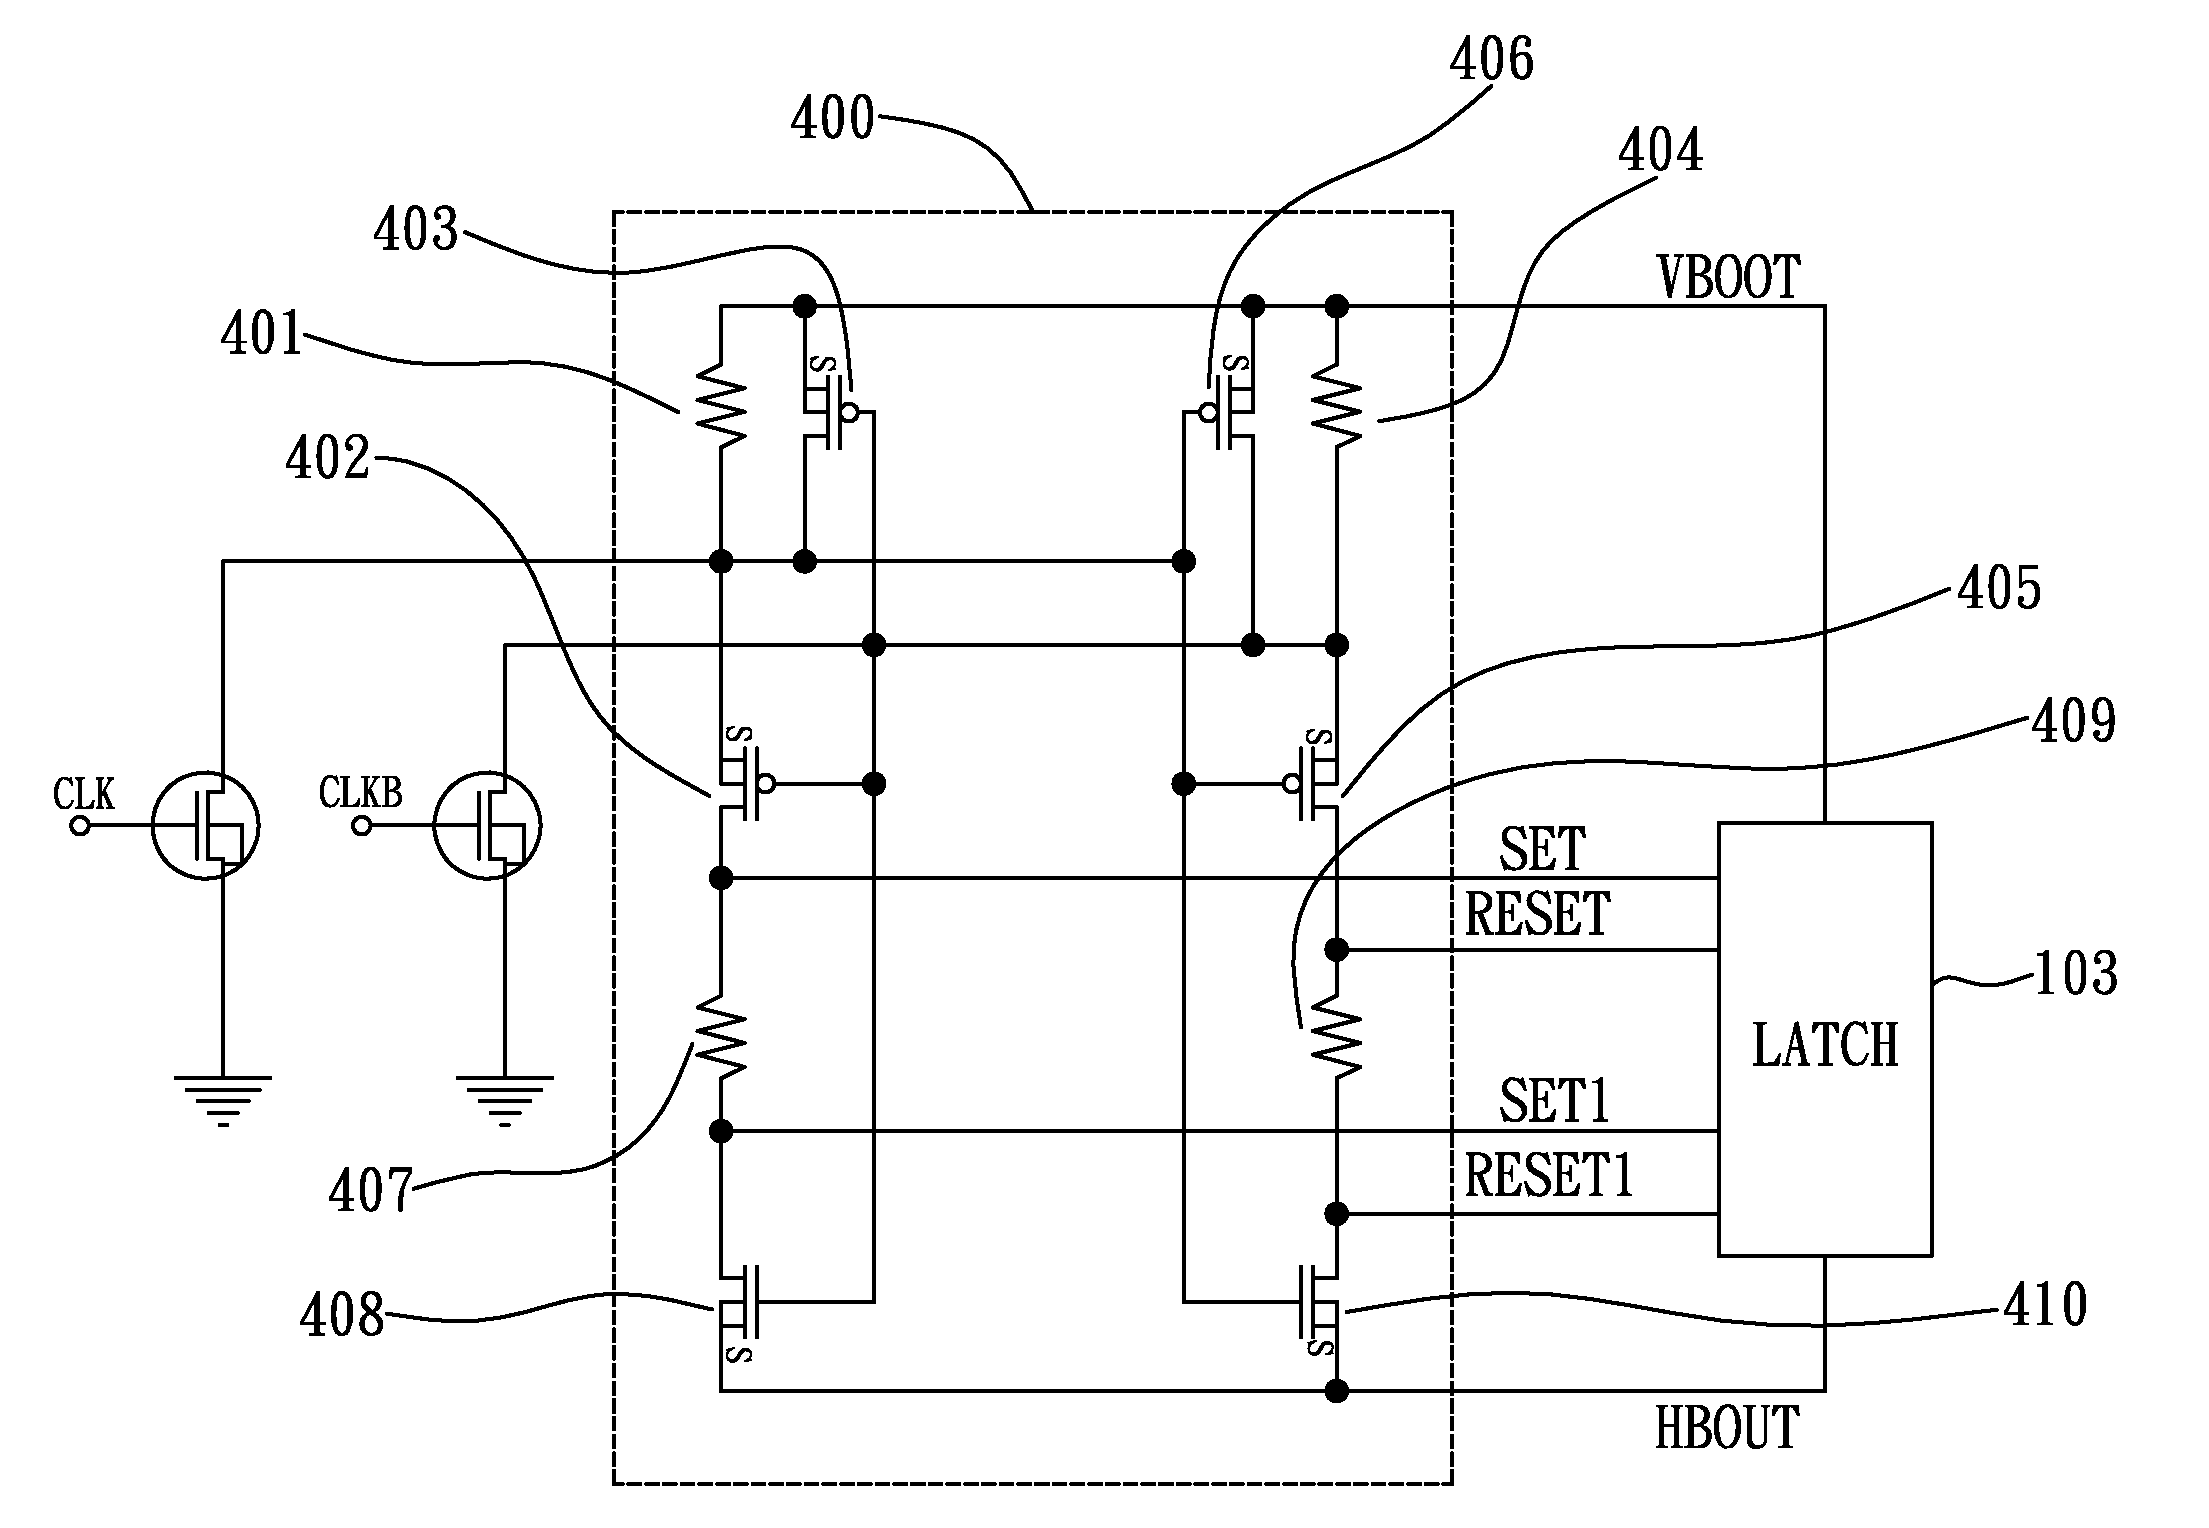 Active-load dominant circuit for common-mode glitch interference cancellation